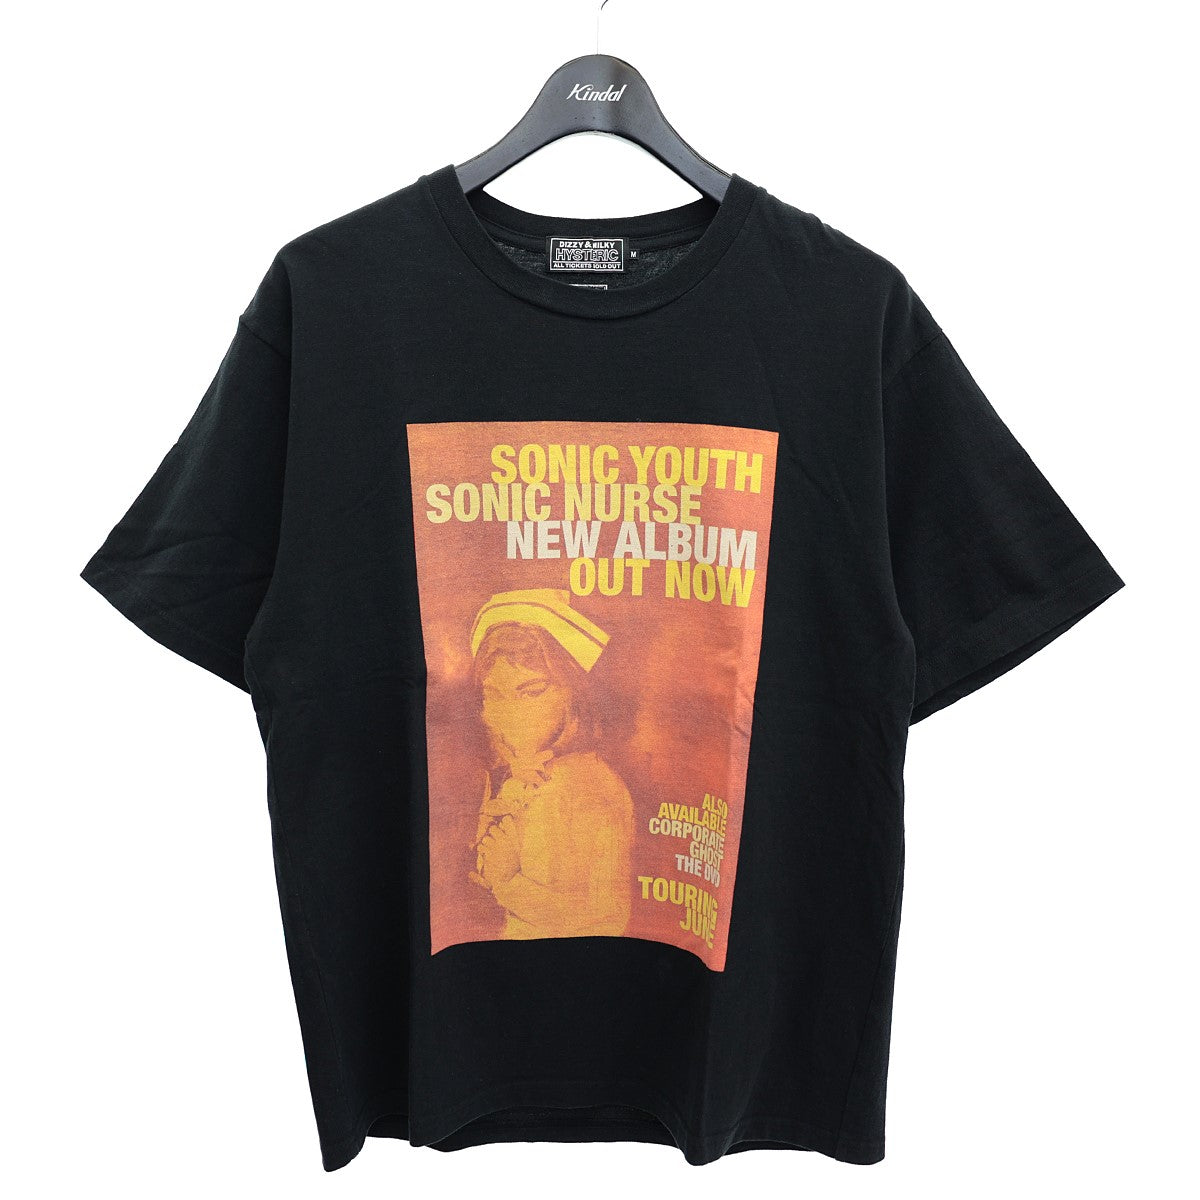 HYSTERIC GLAMOUR(ヒステリックグラマー) SONIC YOUTH プリントTシャツ 